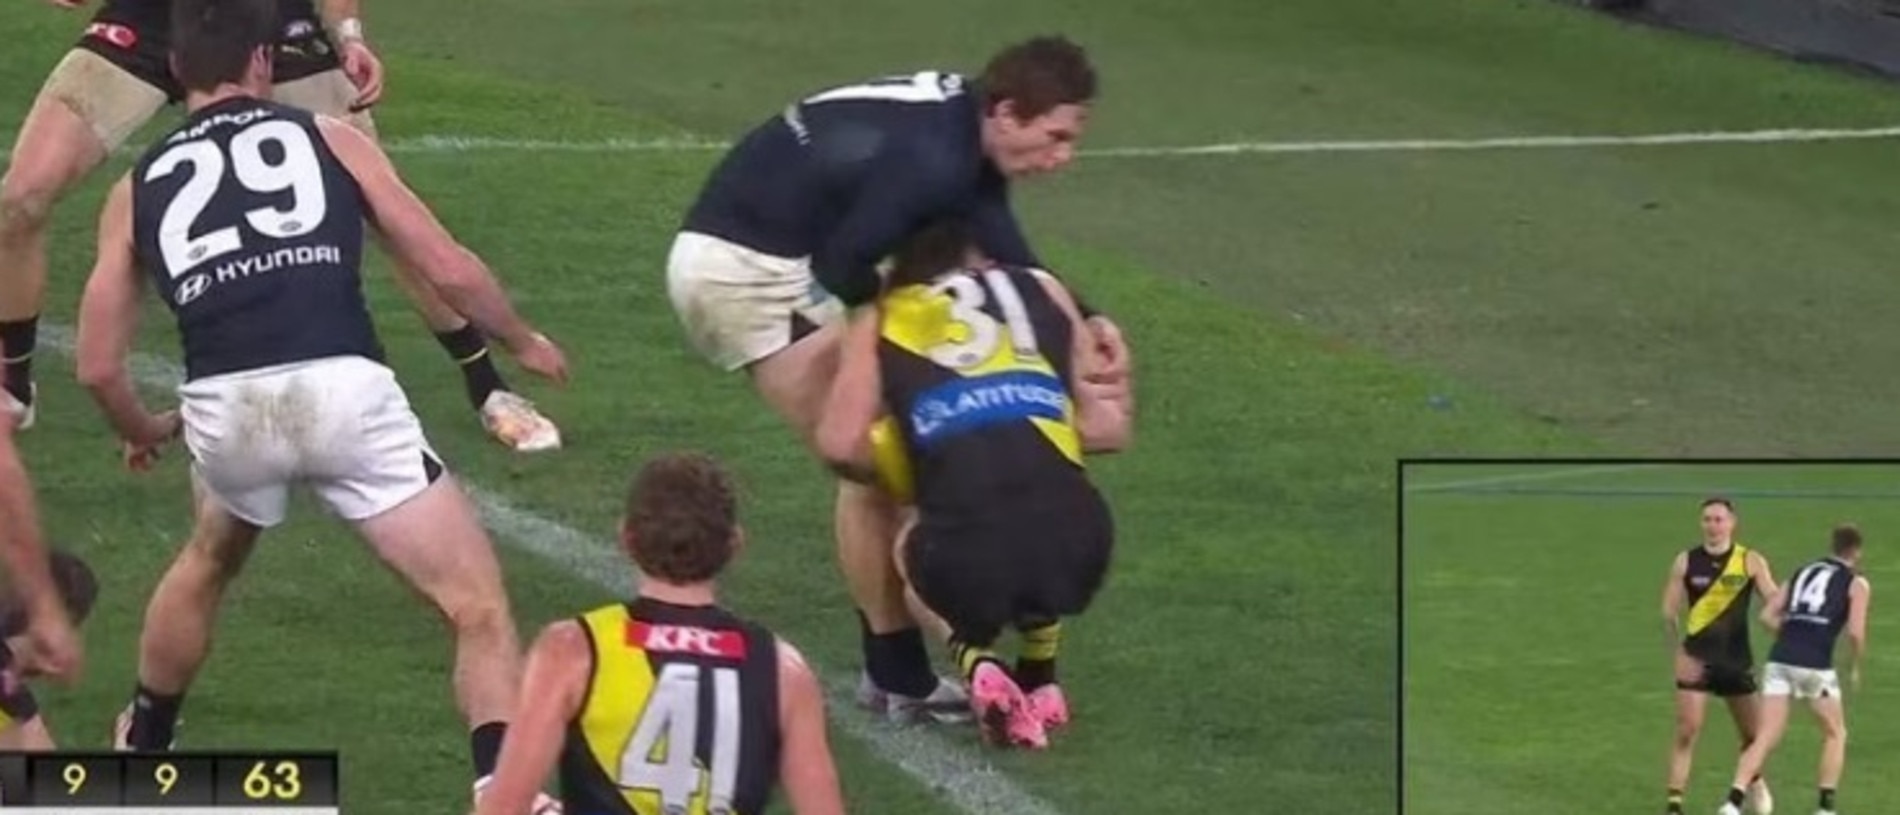 Jordan Boyd is challenging his one-game ban for forceful front-on contact.